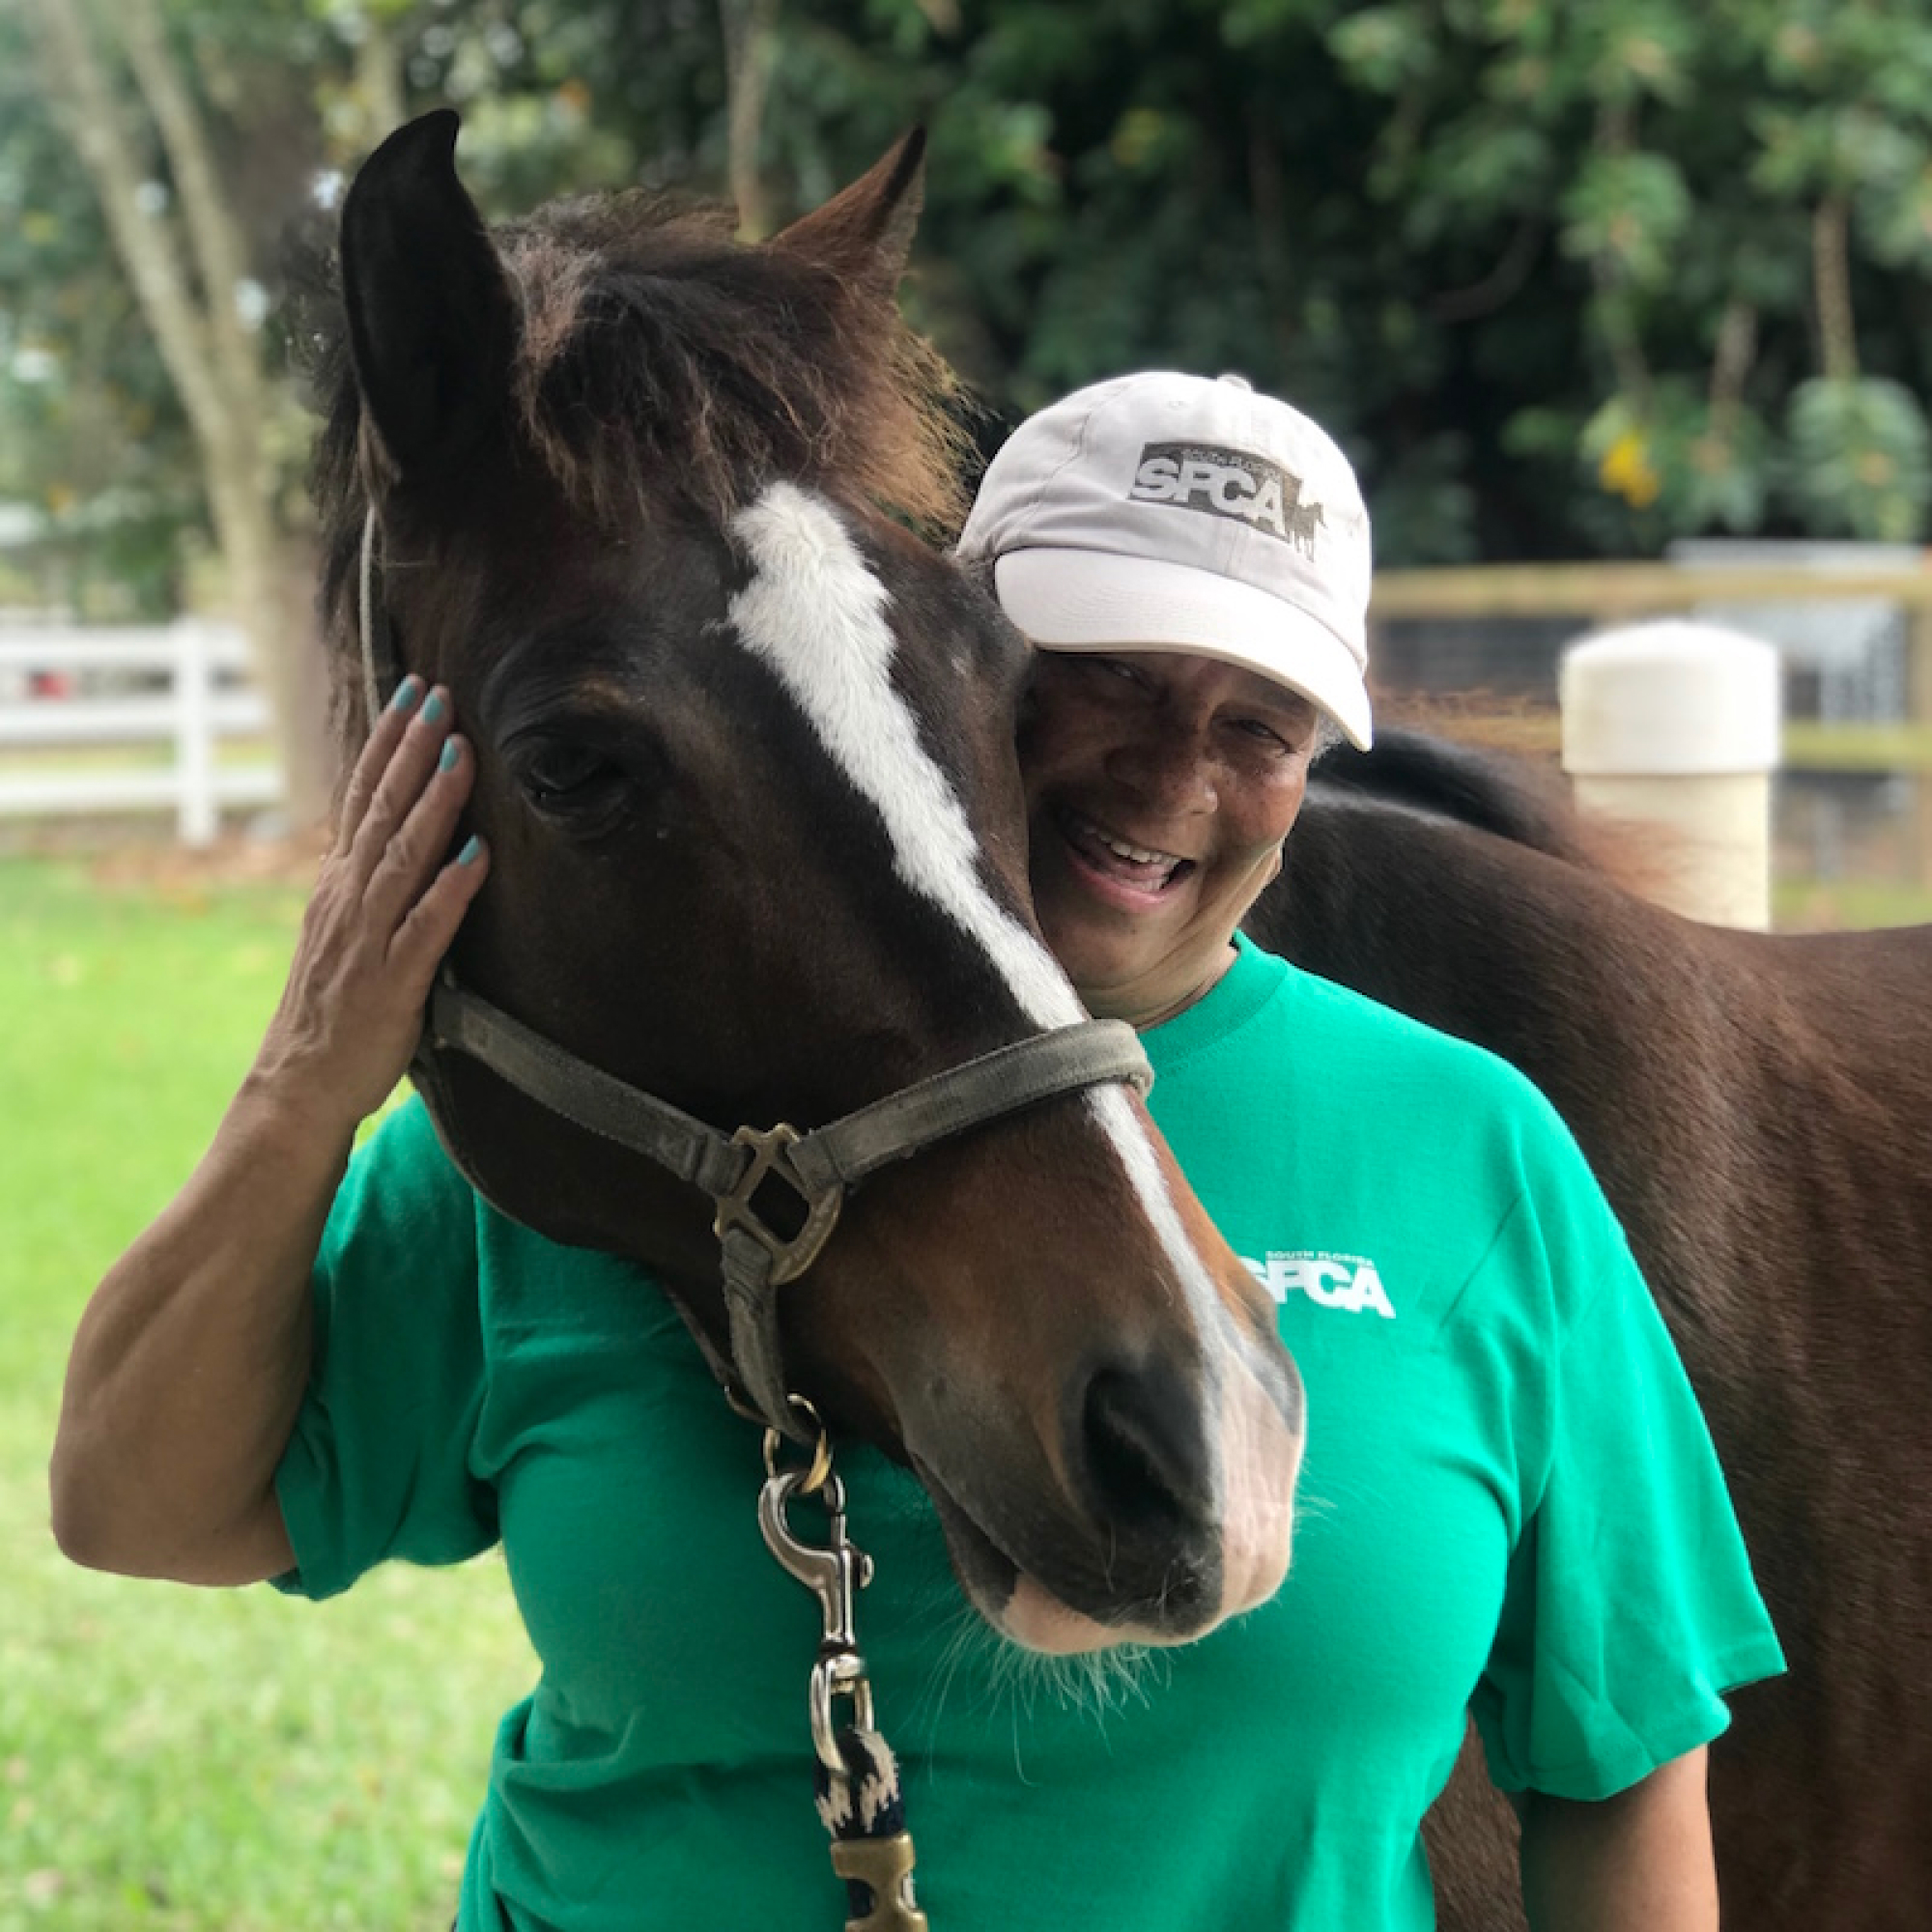 Volunteer at the South Florida Society for the Prevention of Cruelty to Animals